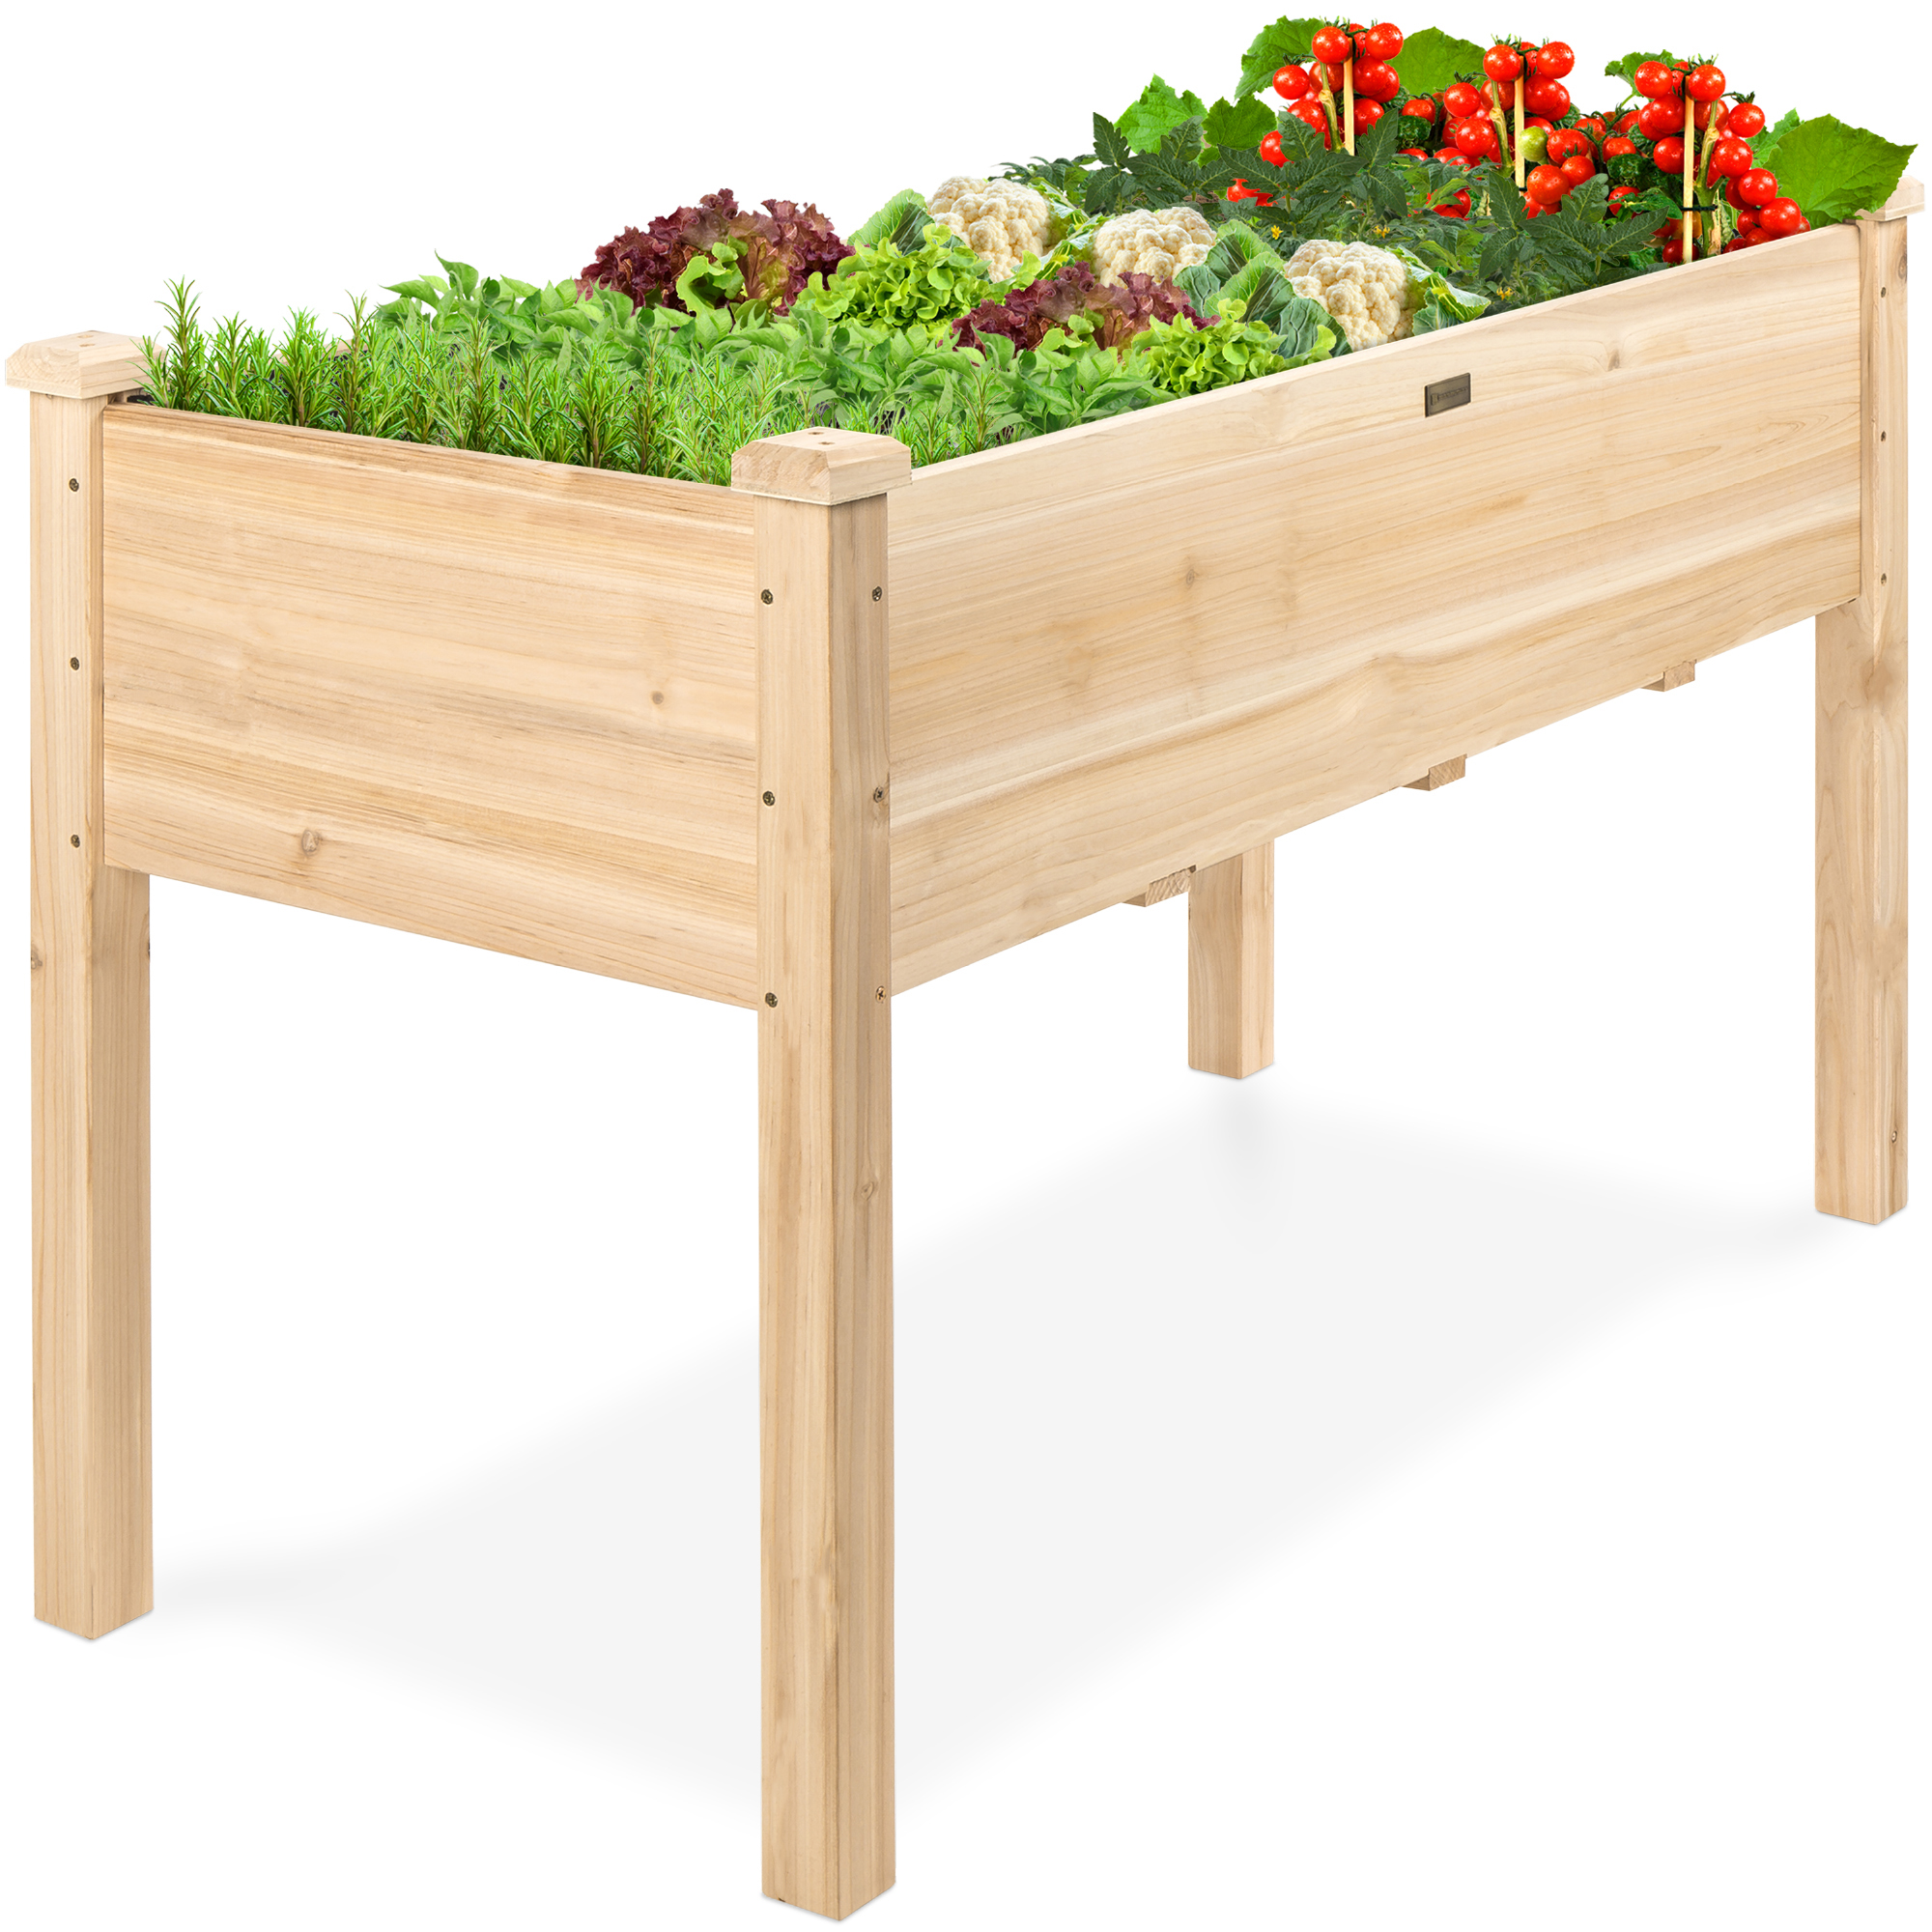 Best Choice Product 48x24x30in Raised Garden Bed, Elevated Wooden Planter for Yard w/ Foot Caps, Liner - Natural - image 1 of 8